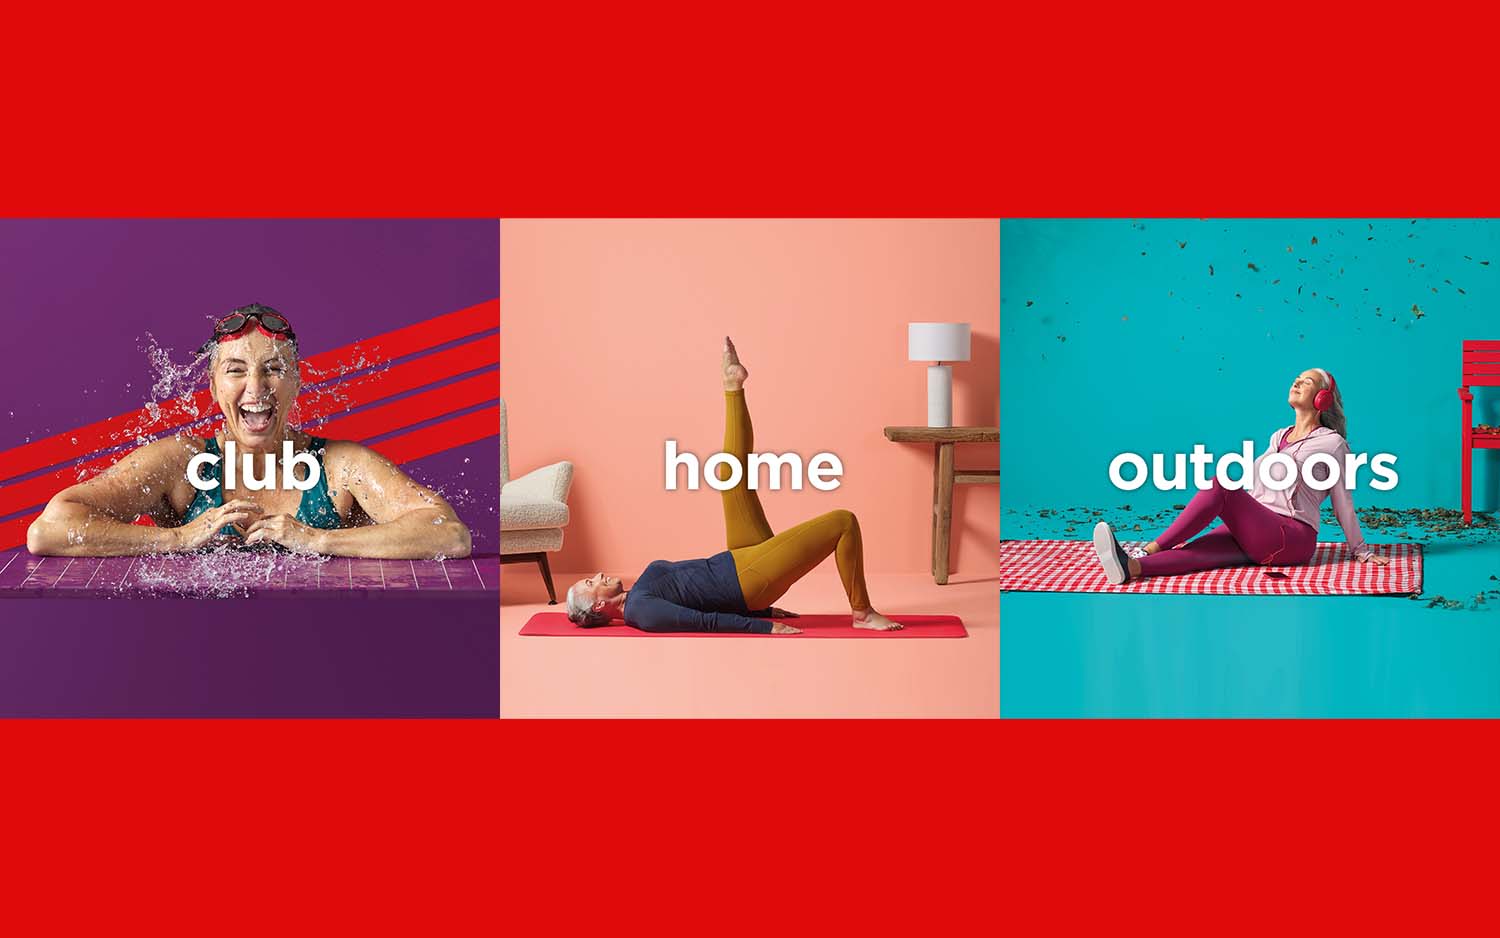 Three images showing a woman working out in club, at home and outdoors